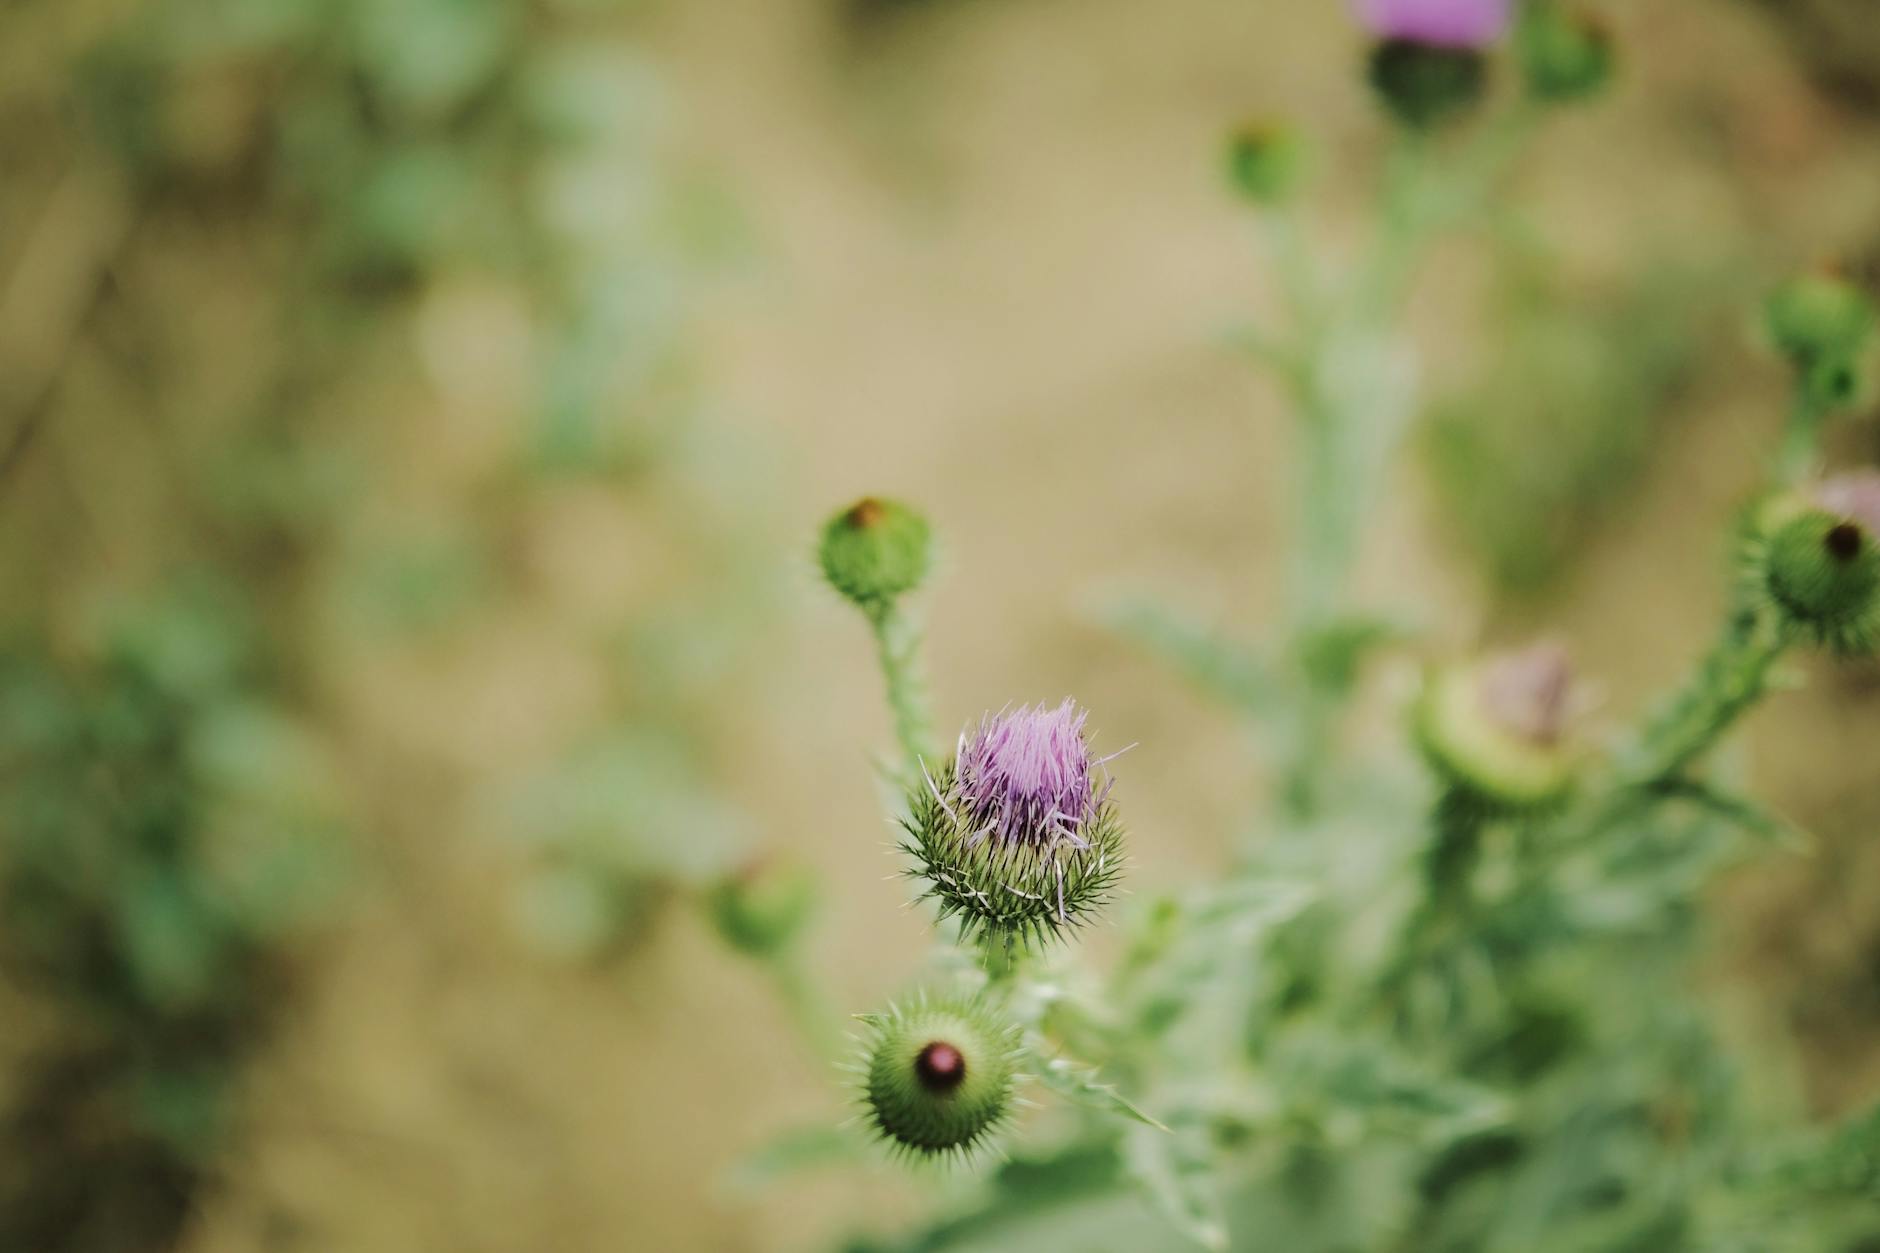 A close up of a thistle flower